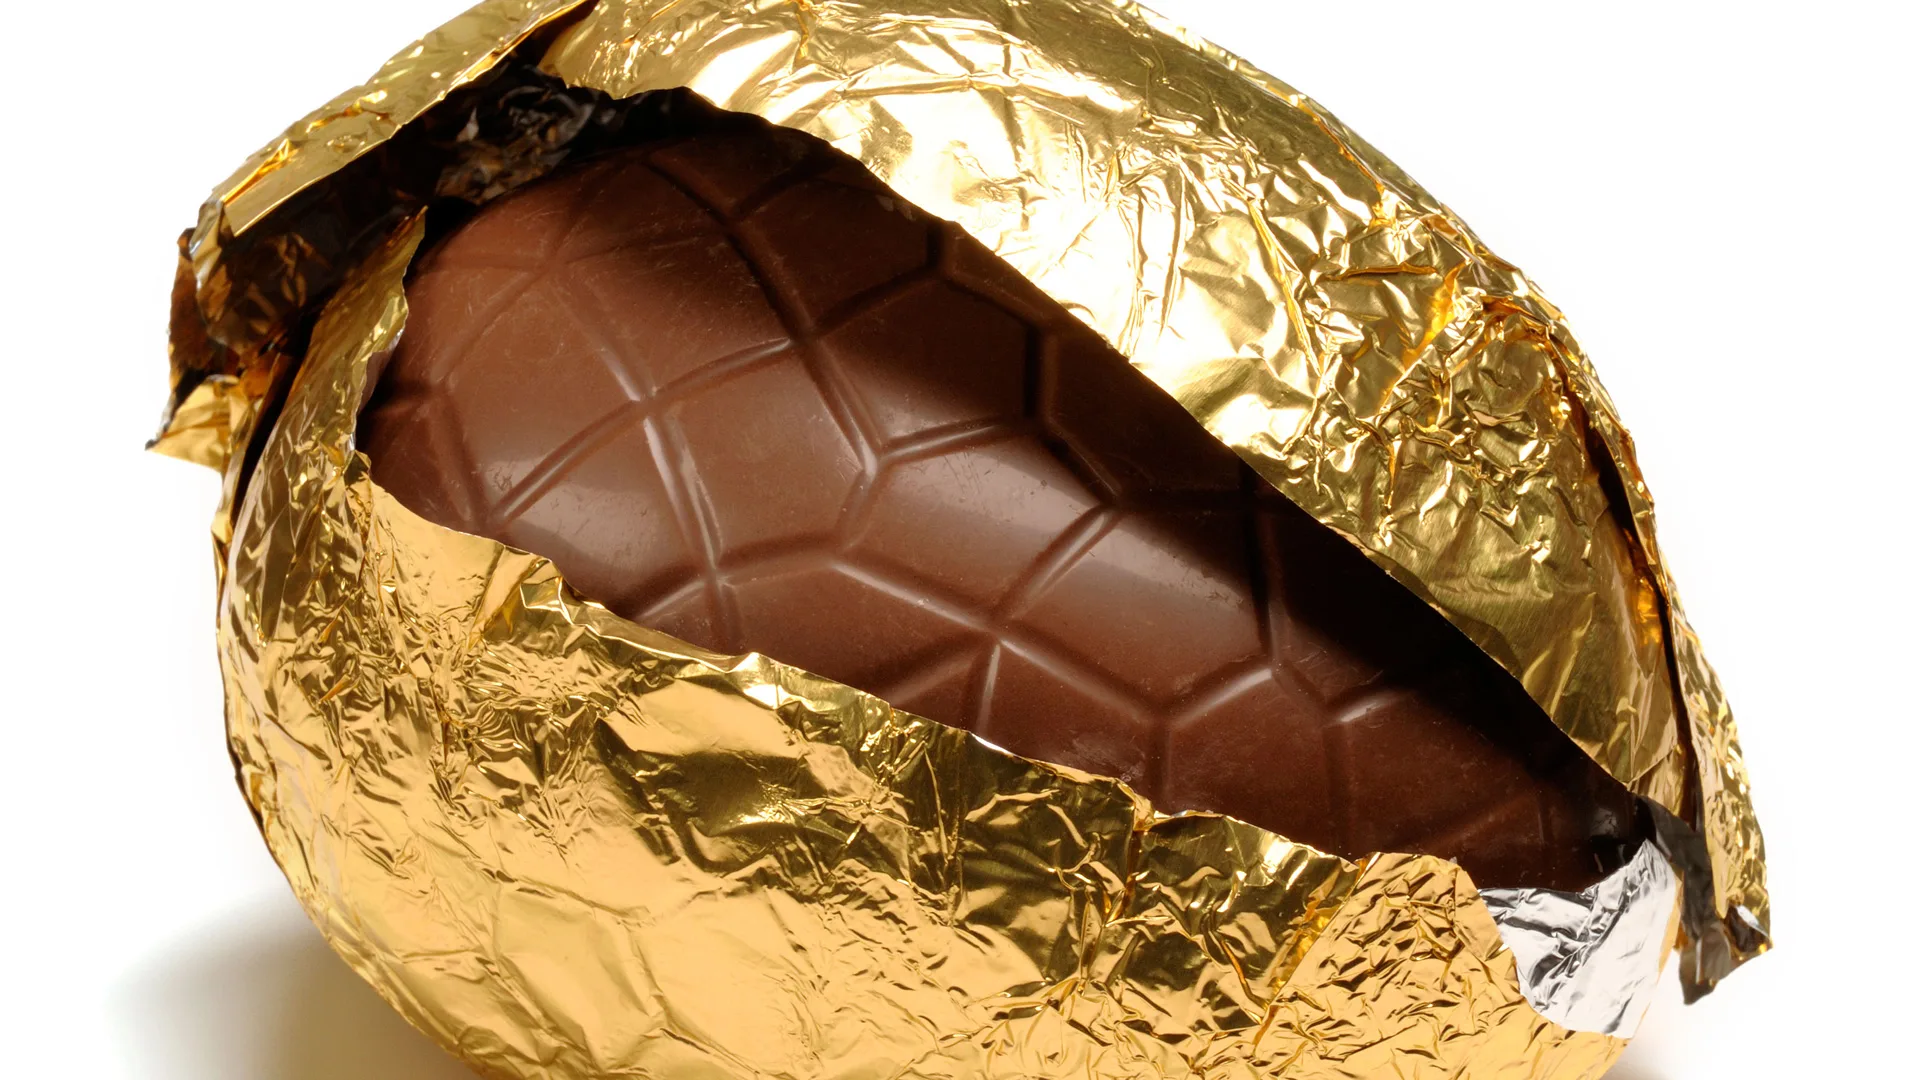 A close-up photograph of a chocolate easter egg in gold foil partially unwrapped exposing some of the chocolate against a white background